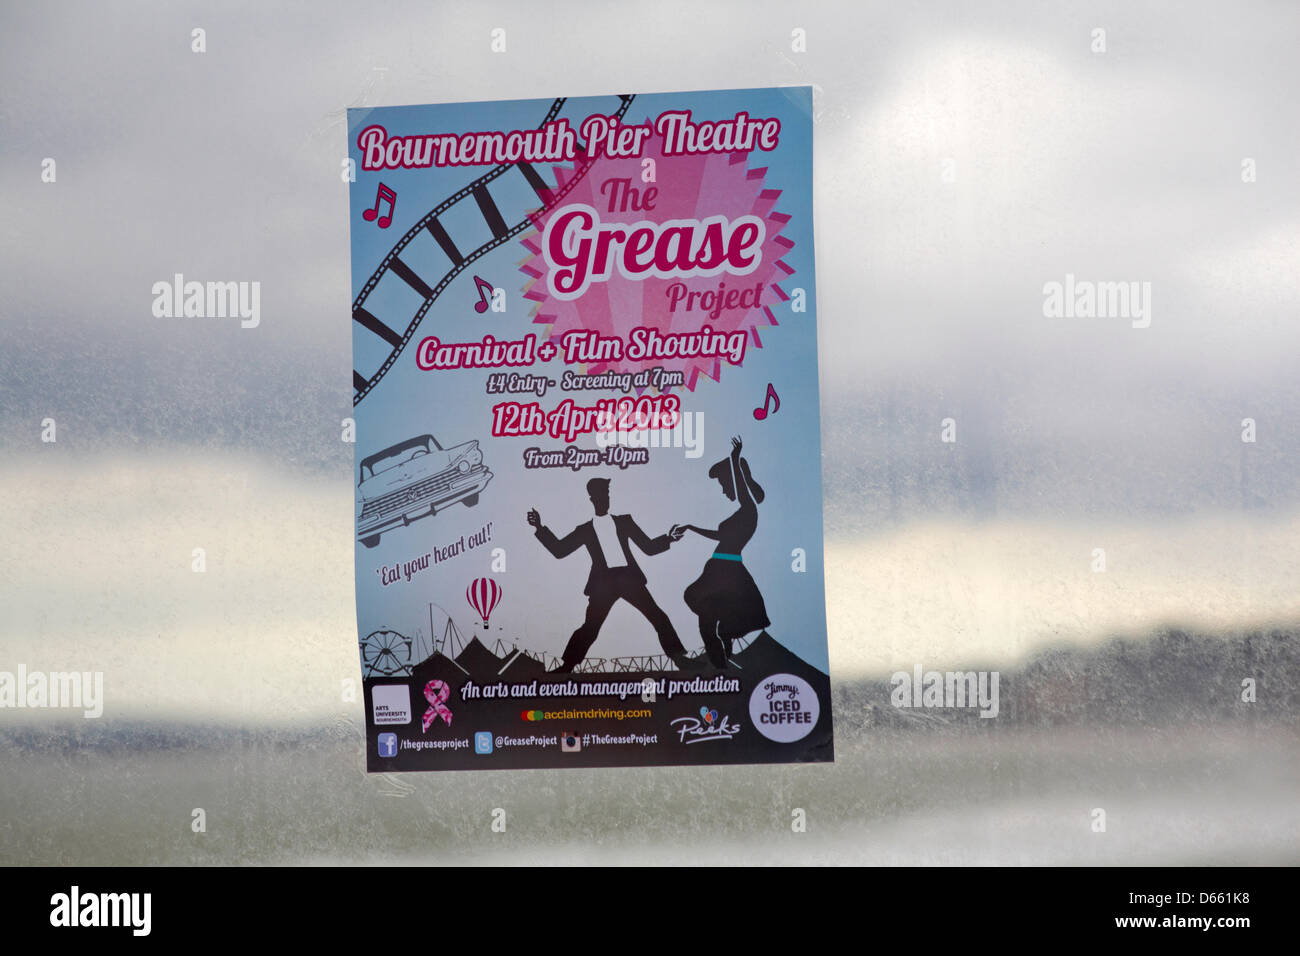 Bournemouth, UK Friday 12 April 2013. The Grease Project on Bournemouth Pier. In aid of Cancer Research UK, the creators of Alternative Events, invoke the nostalgic romance of the 1950s with the Grease carnival on the pier followed by an exclusive screening of Grease the Musical at the Pier Theatre. Credit: Carolyn Jenkins/Alamy Live News Stock Photo